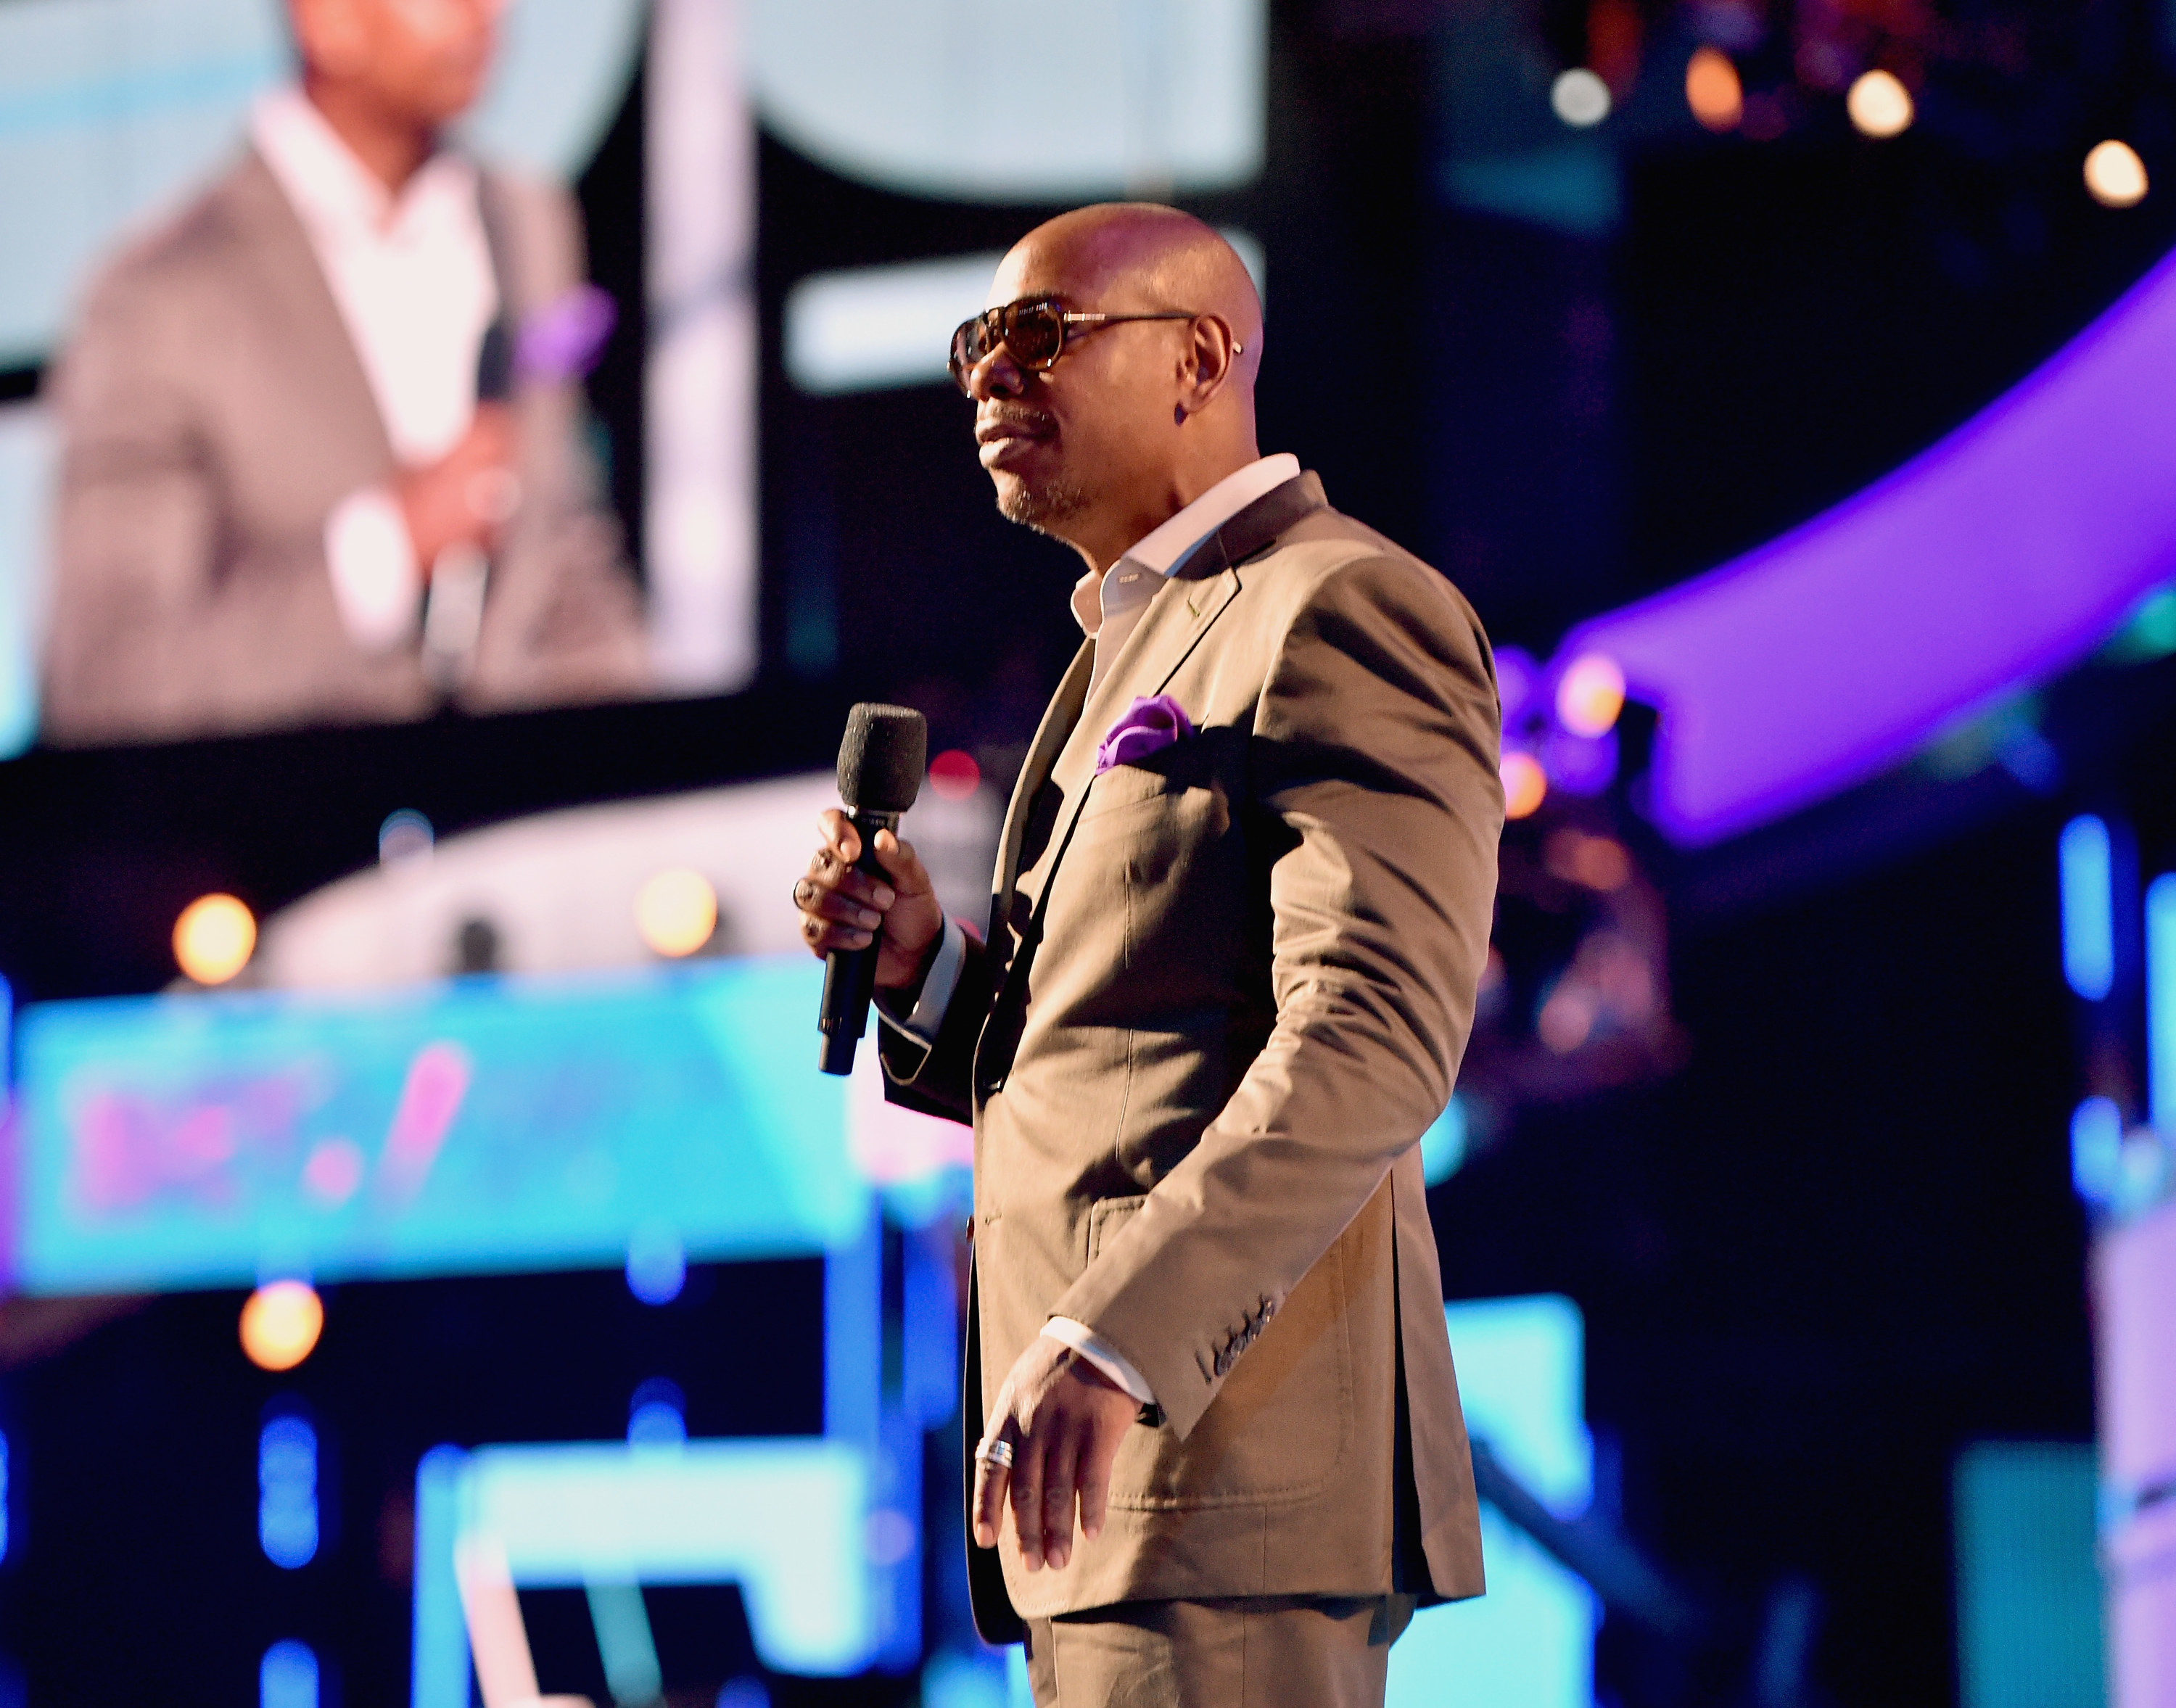 Chappelle standing onstage and looking dapper in a suit